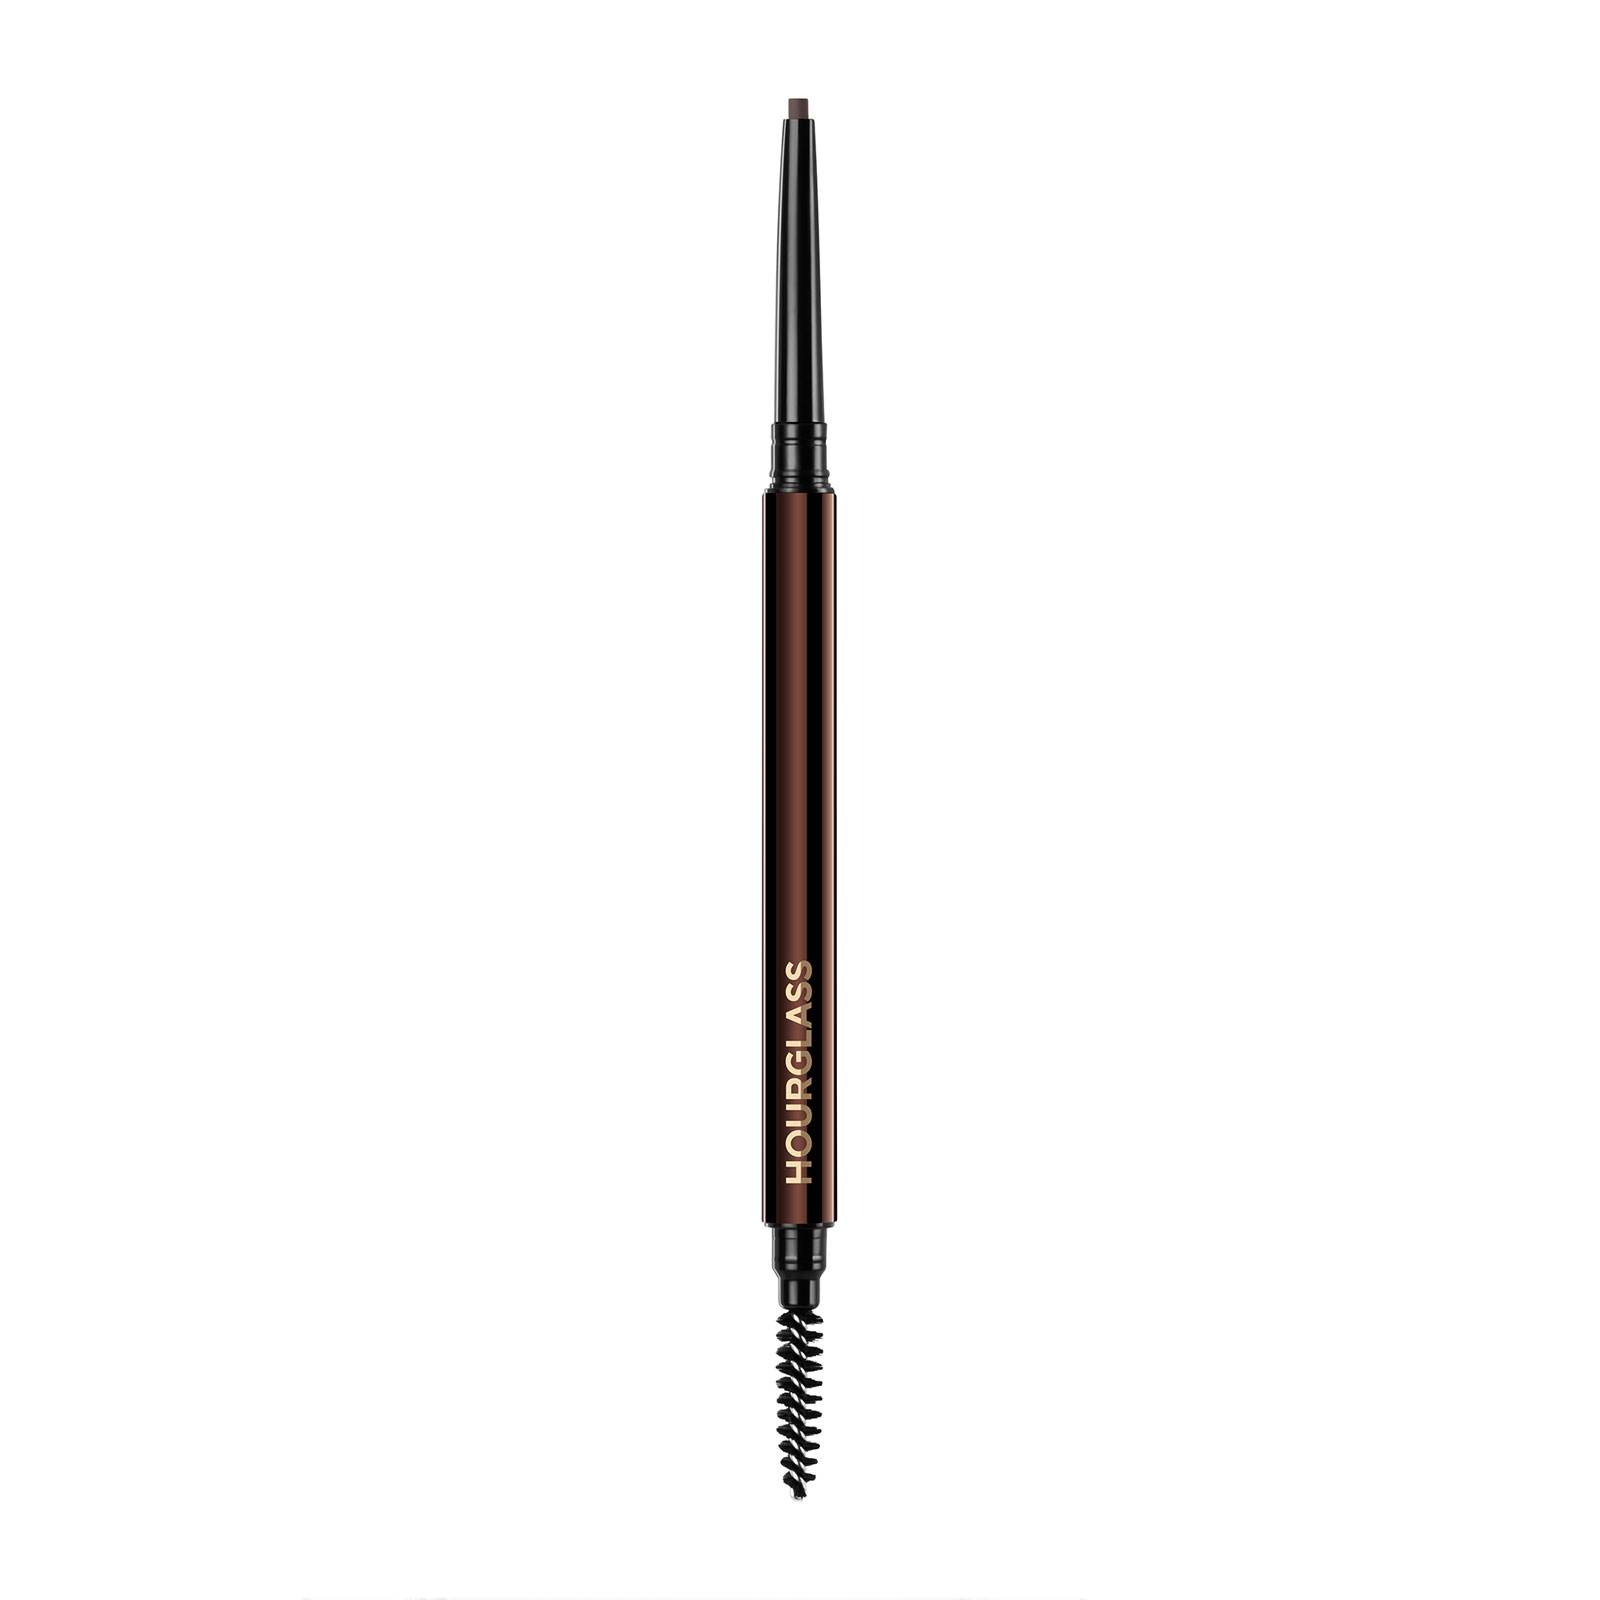 Hourglass Arch Brow Micro Sculpting Pencil 0.4G Ash